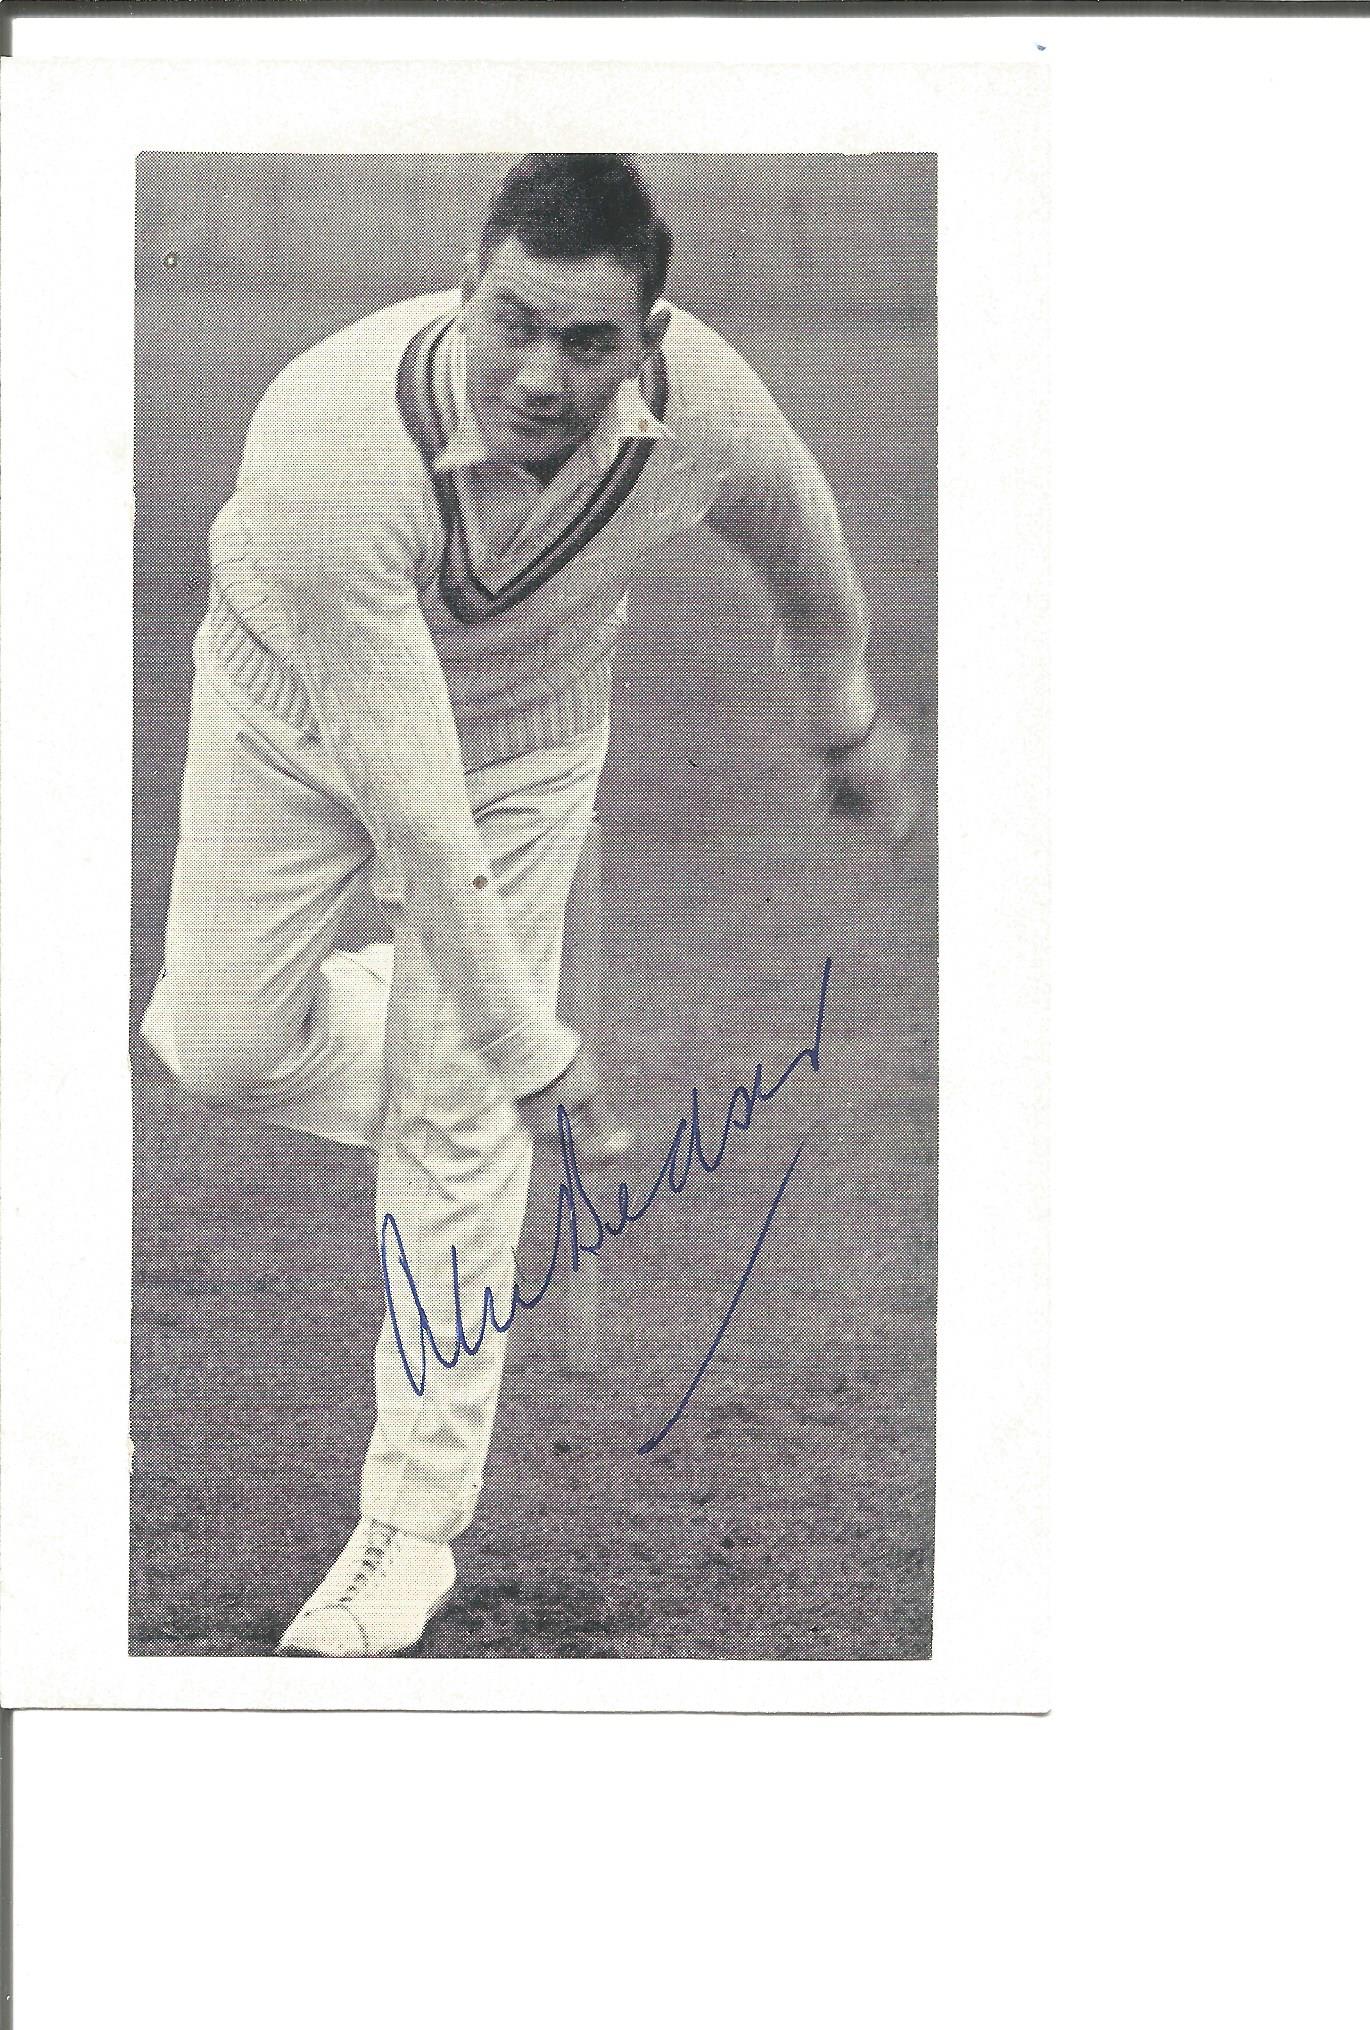 Cricket Alec Bedser signed 6x4 black and white post card photo. Good Condition. All autographed